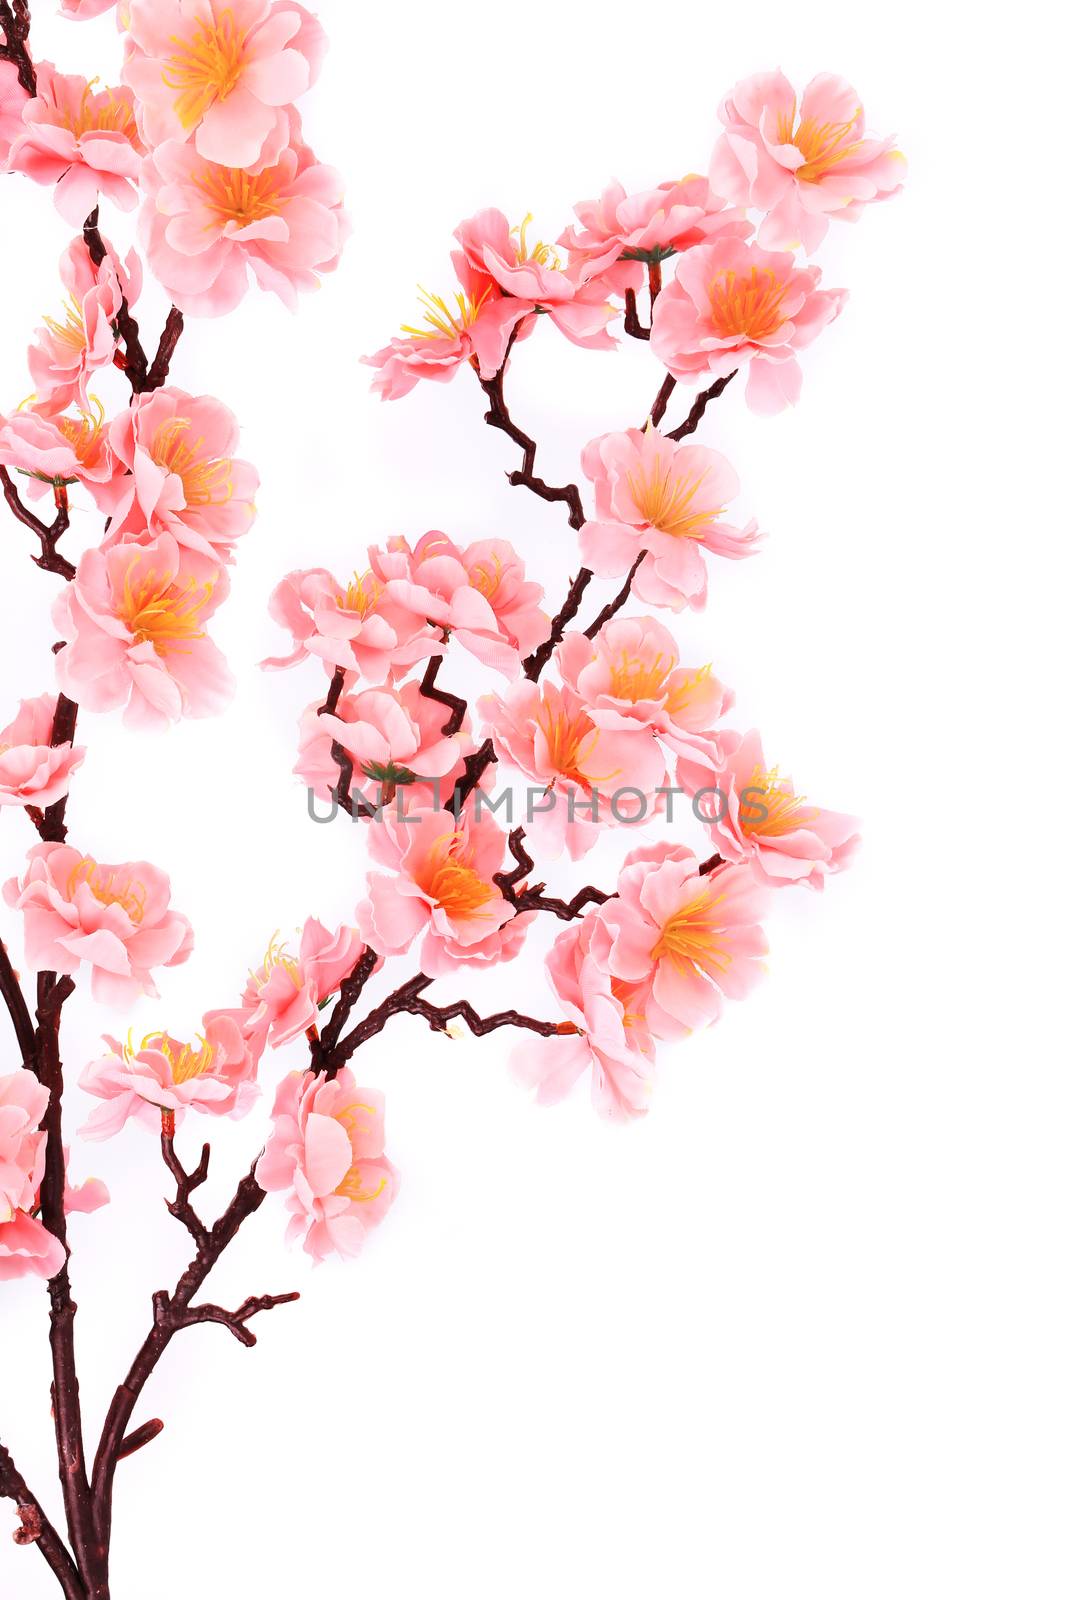 Branch of gentle pink artificial flowers. Isolated on a white background.